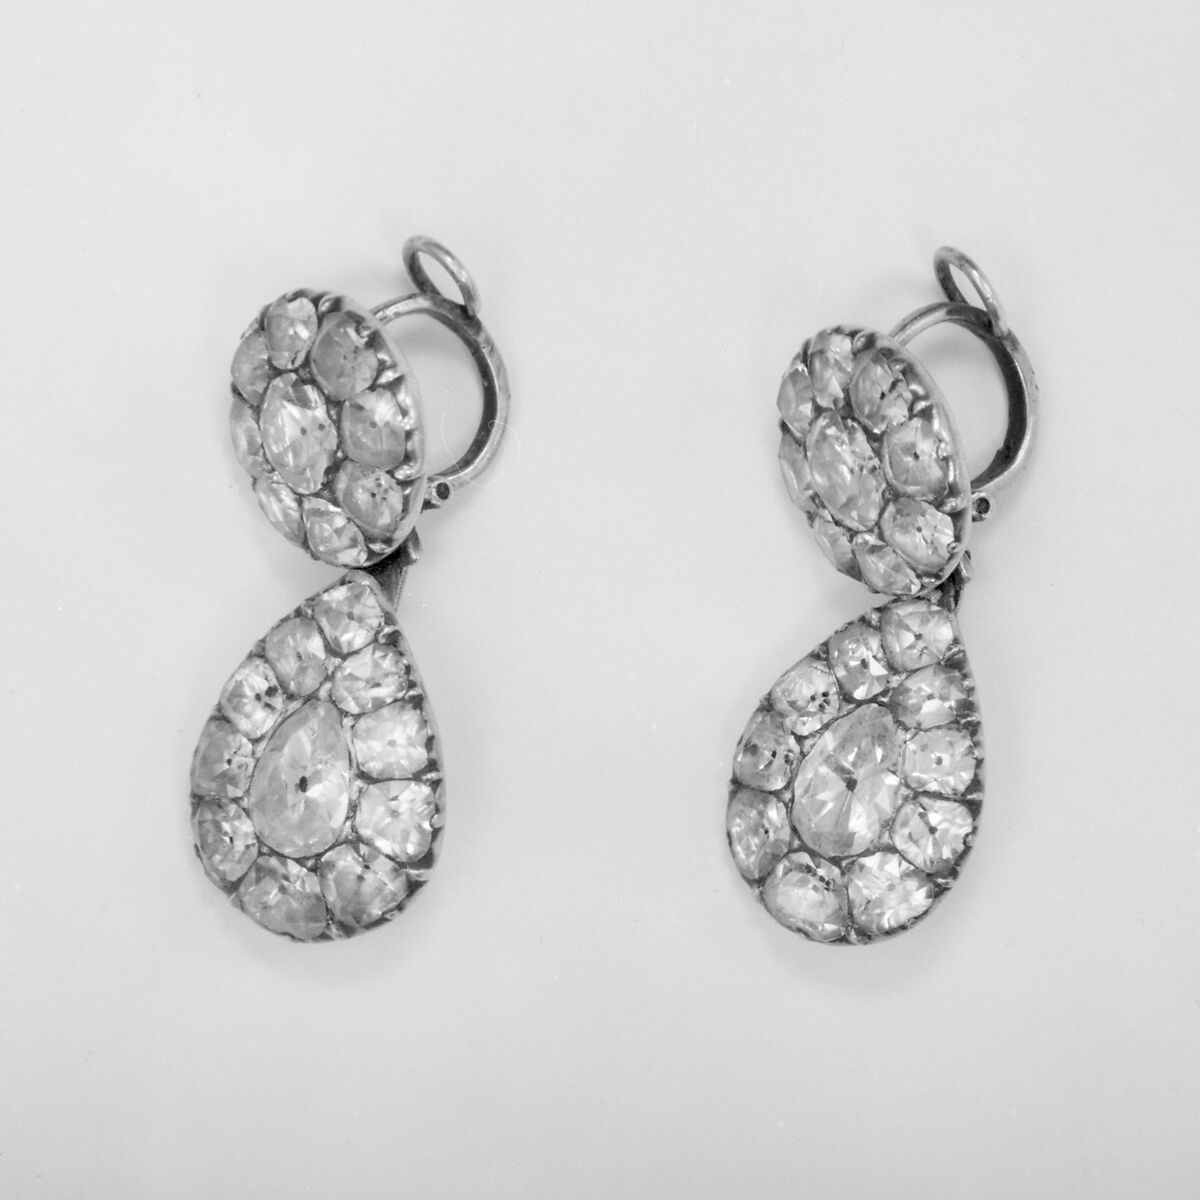 Pair of earrings, Silver, paste diamonds, possibly Portuguese 